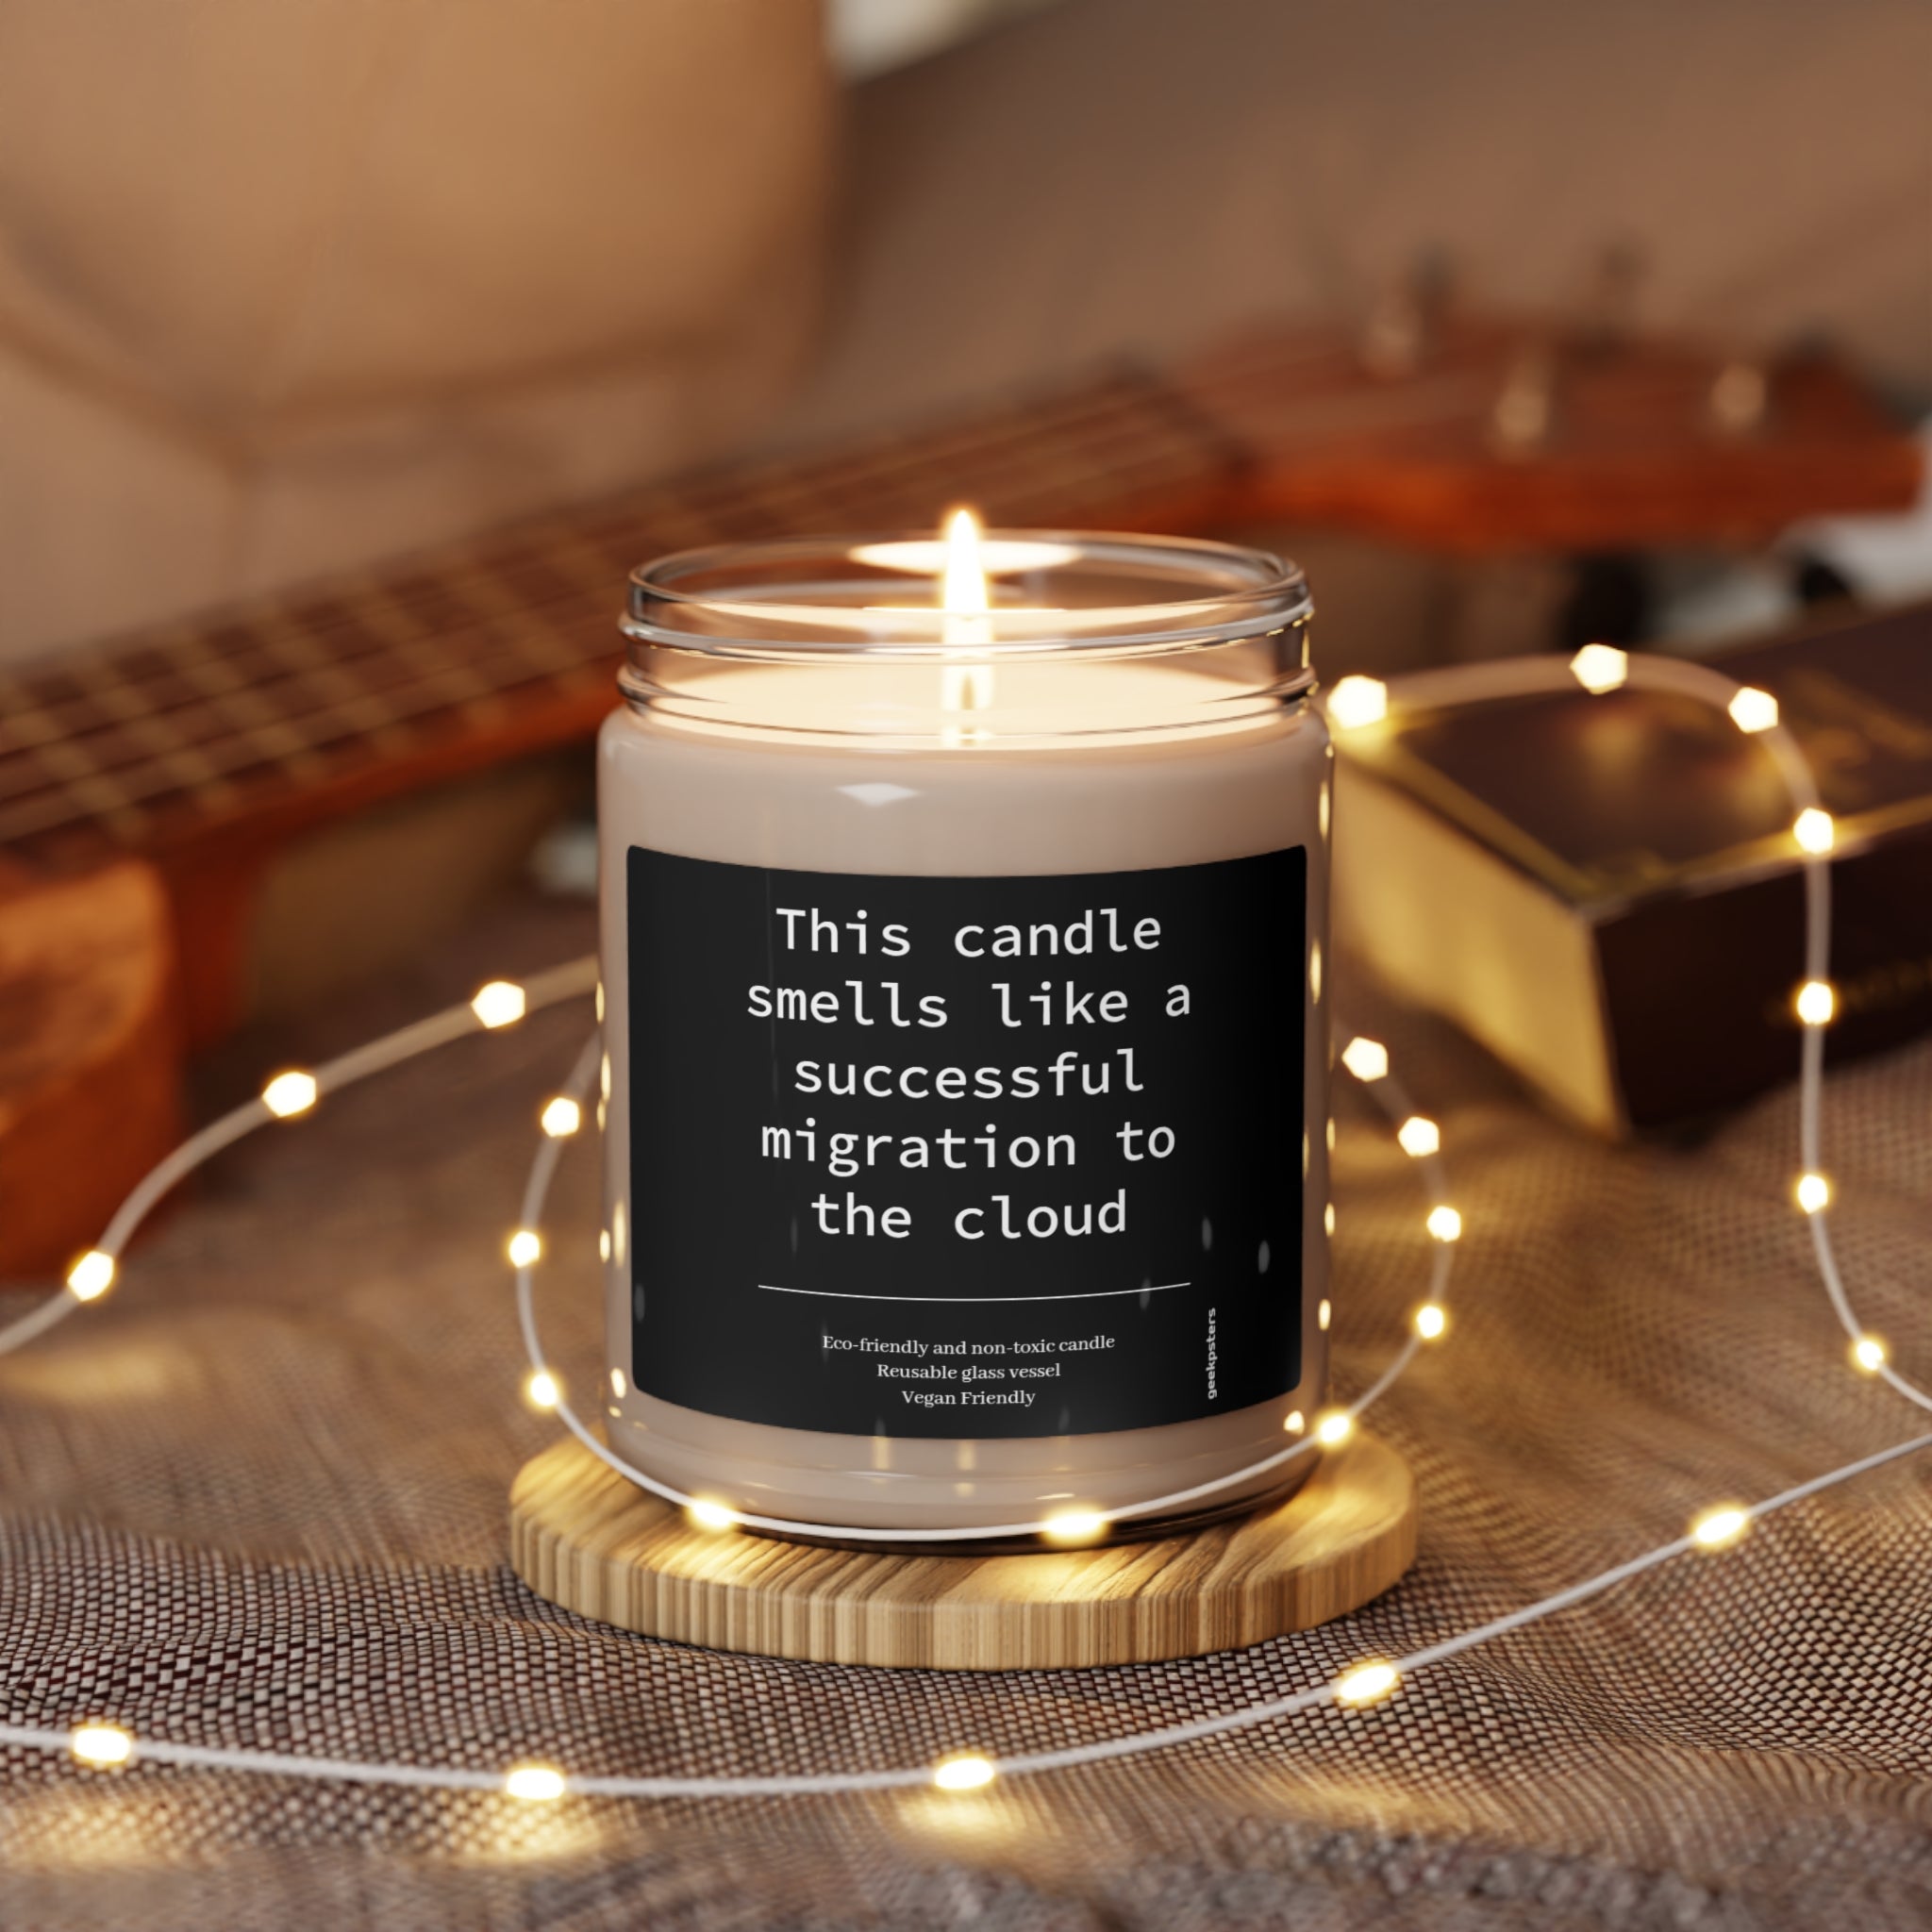 A lit "This candle smells like a successful migration to the cloud" scented soy wax candle with a humorous label related to cloud technology on a wooden surface surrounded by fairy lights.